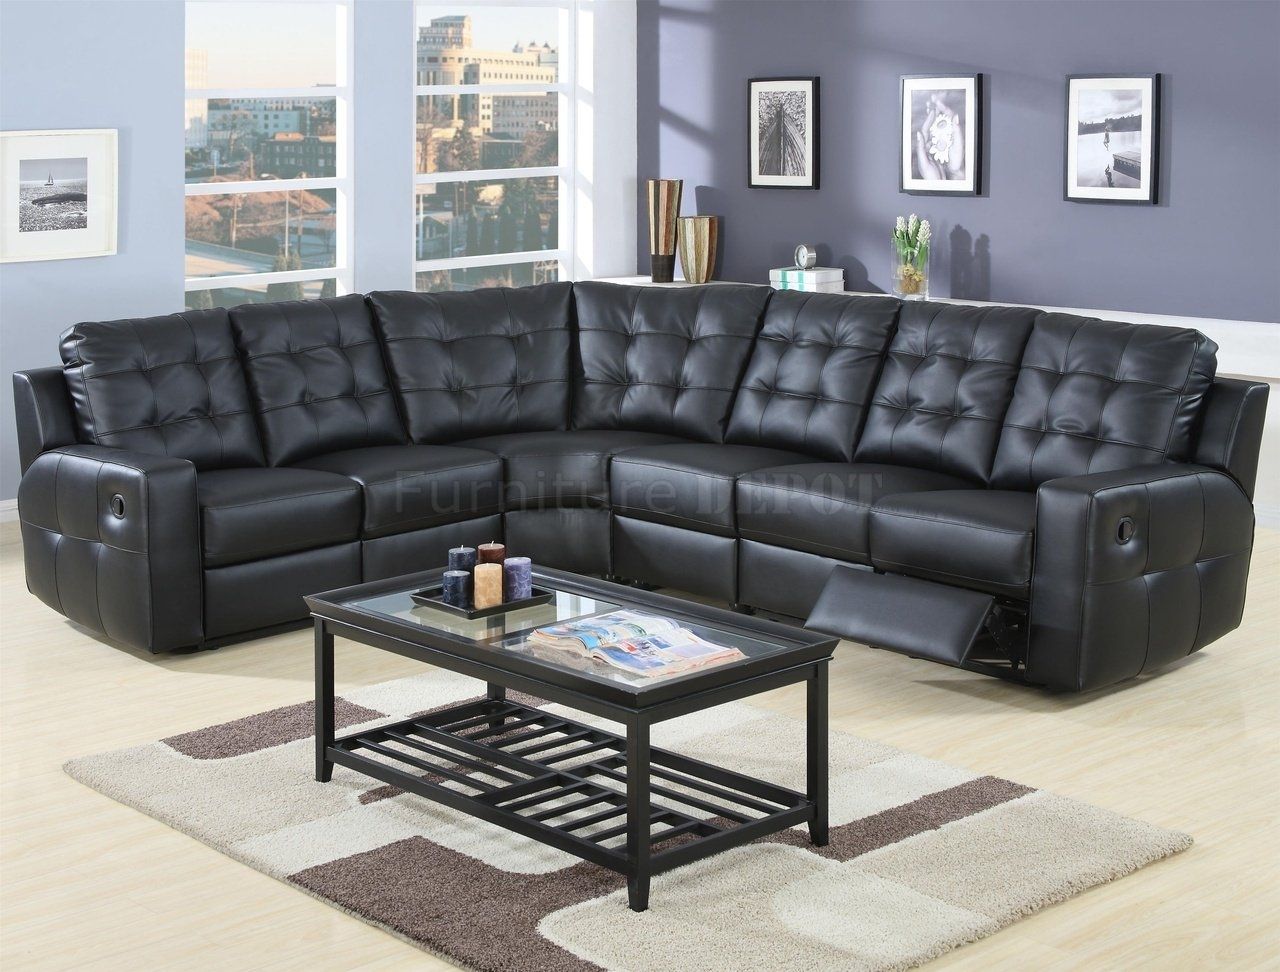 Black Sectional Sofa With Recliners – Nrhcares With Regard To Leather Recliner Sectional Sofas (Photo 8 of 10)